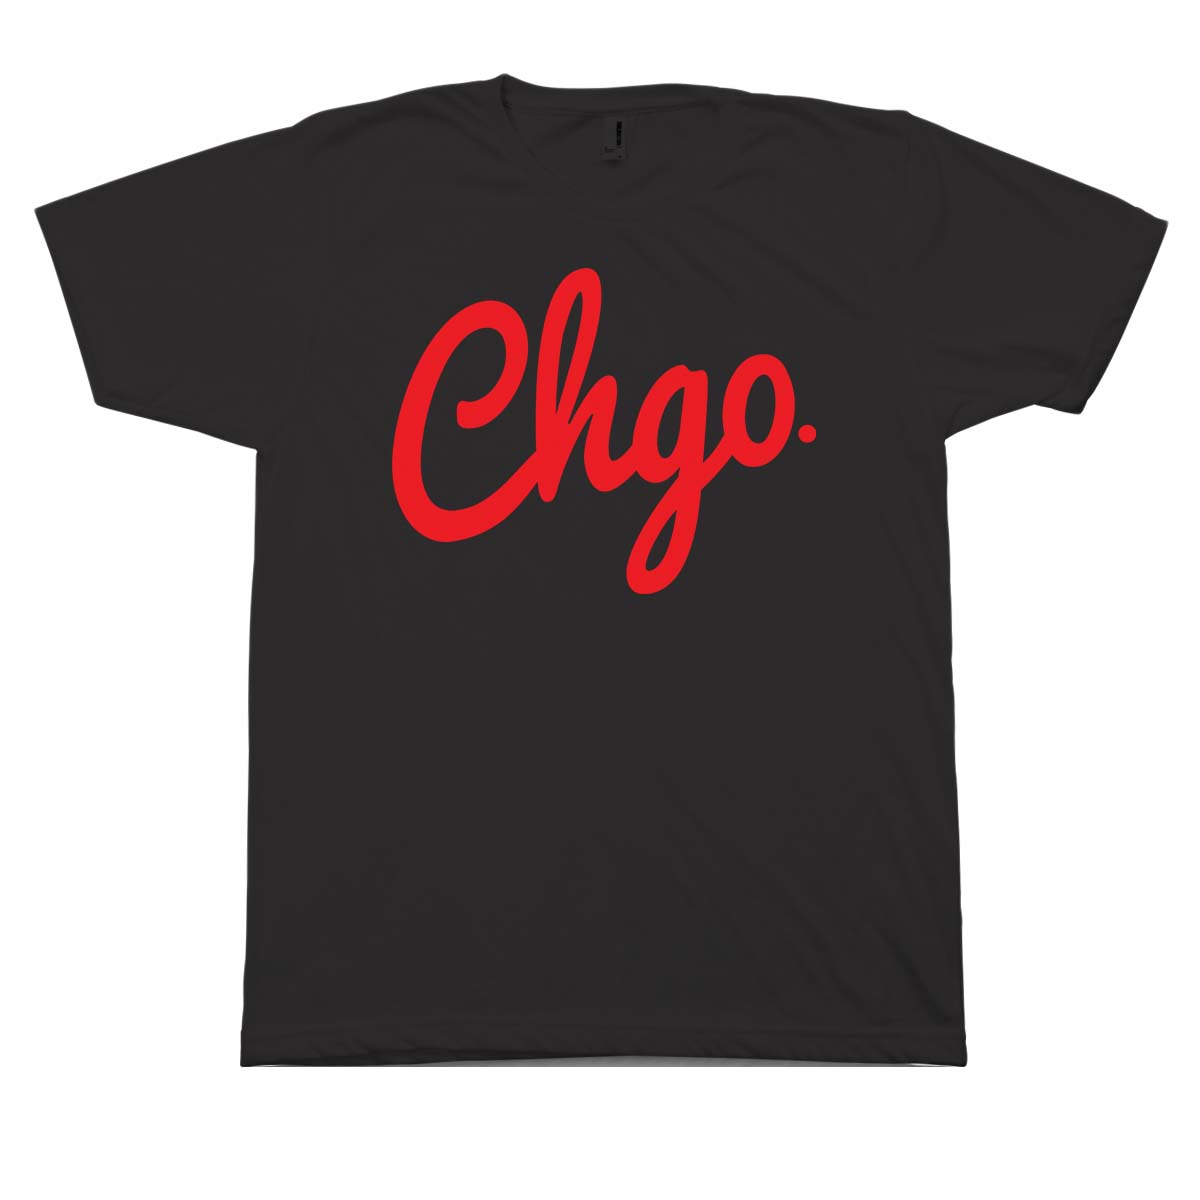 CHGO Black and Red T-Shirt